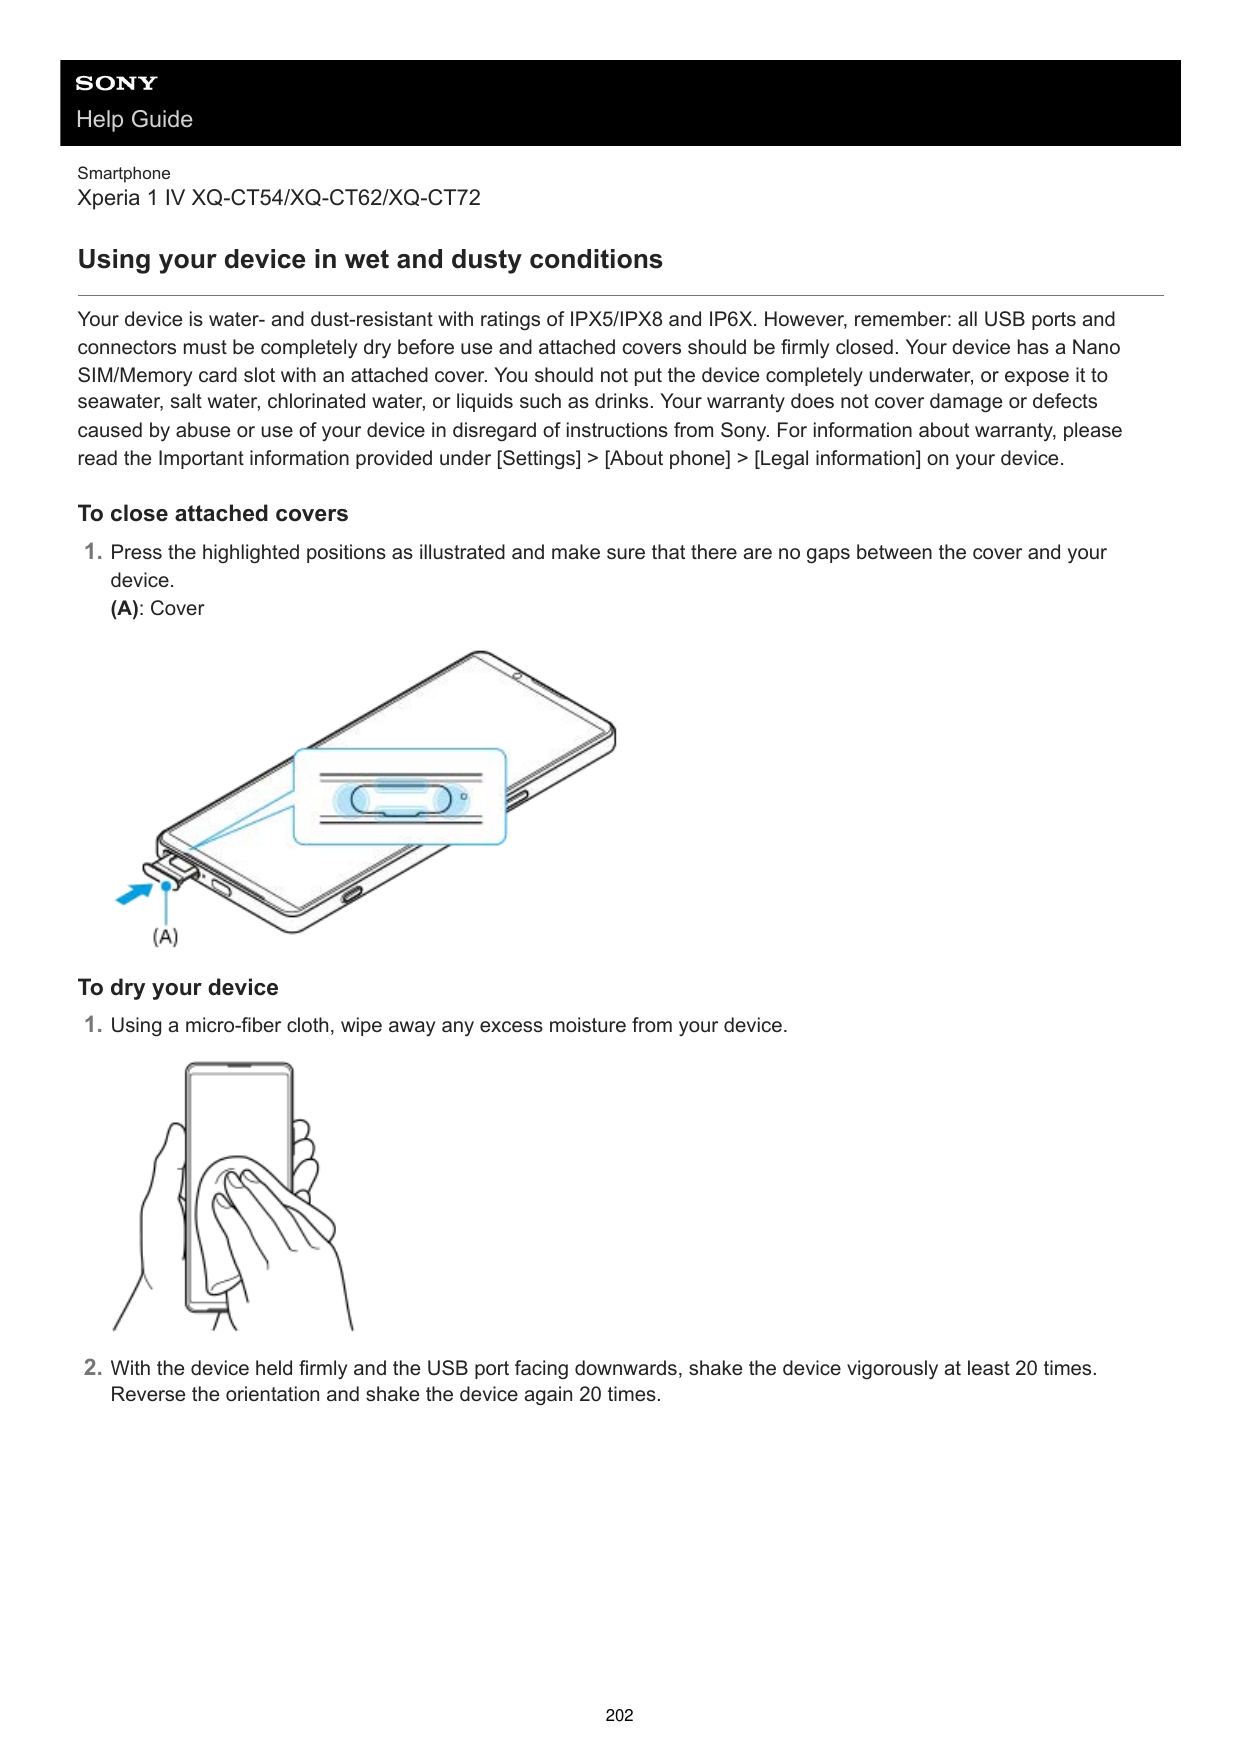 Help GuideSmartphoneXperia 1 IV XQ-CT54/XQ-CT62/XQ-CT72Using your device in wet and dusty conditionsYour device is water- and du